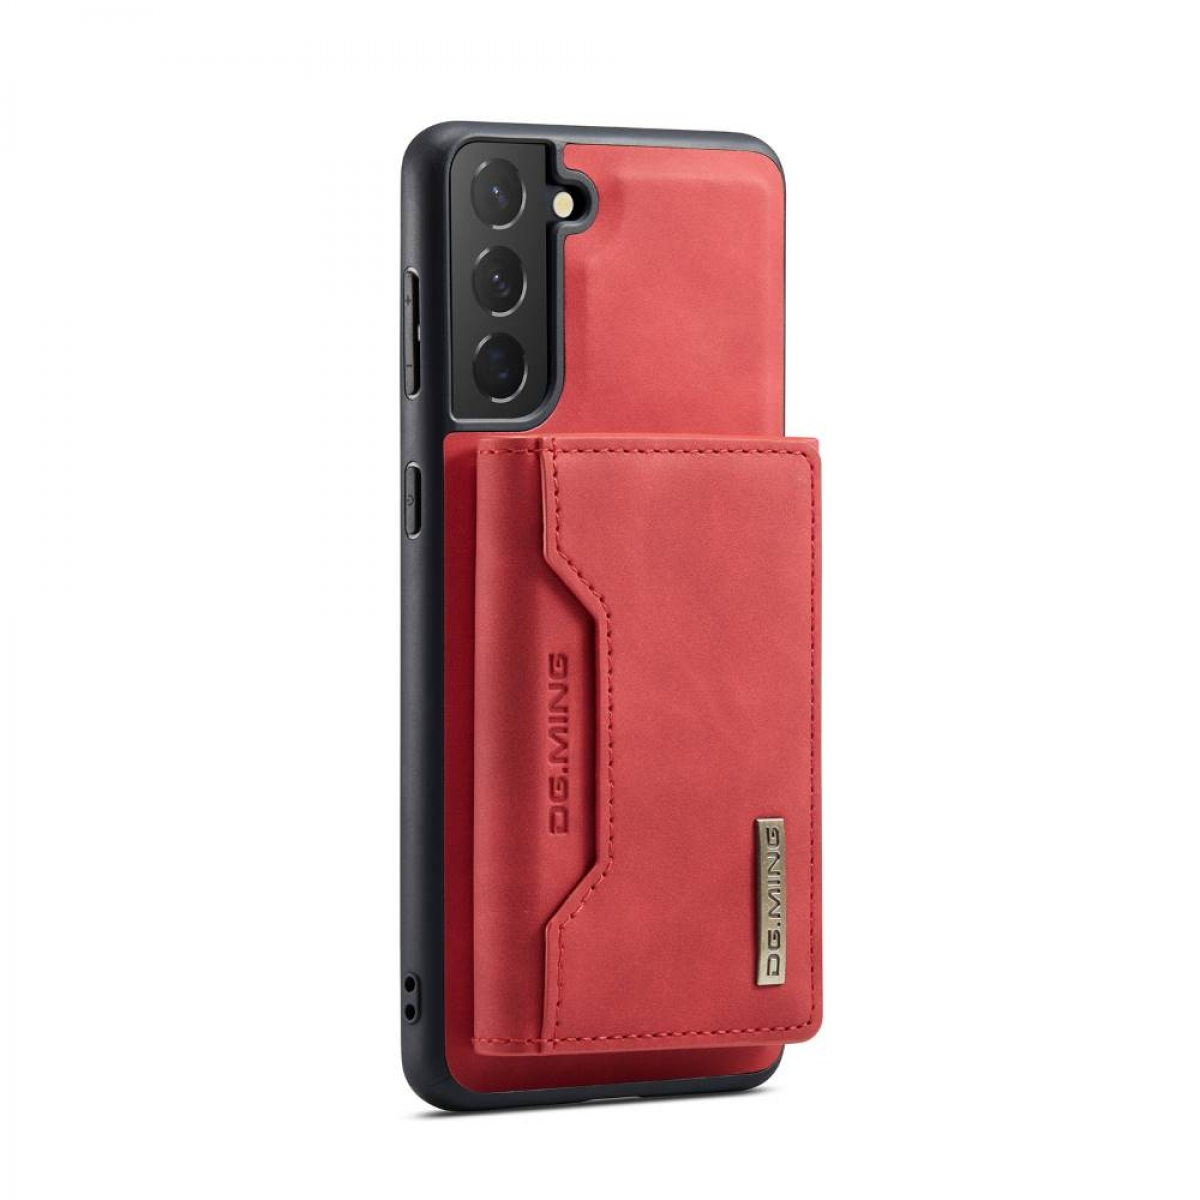 DG MING M2 2in1, Rot S23, Backcover, Samsung, Galaxy